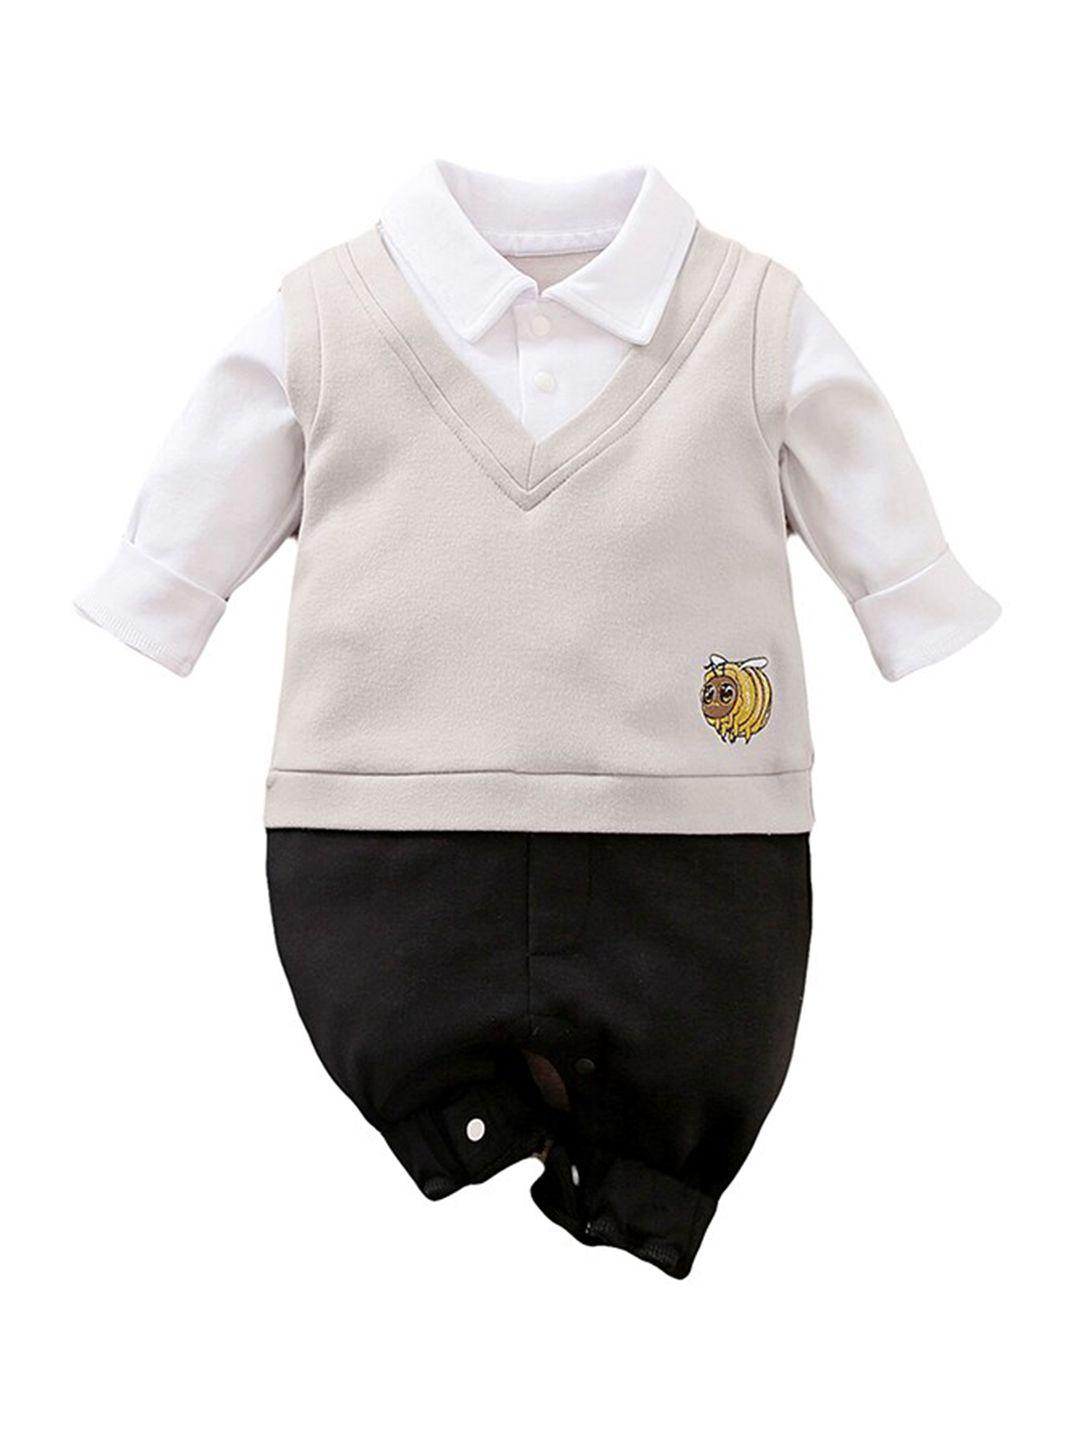 stylecast boys embroidered pure cotton romper